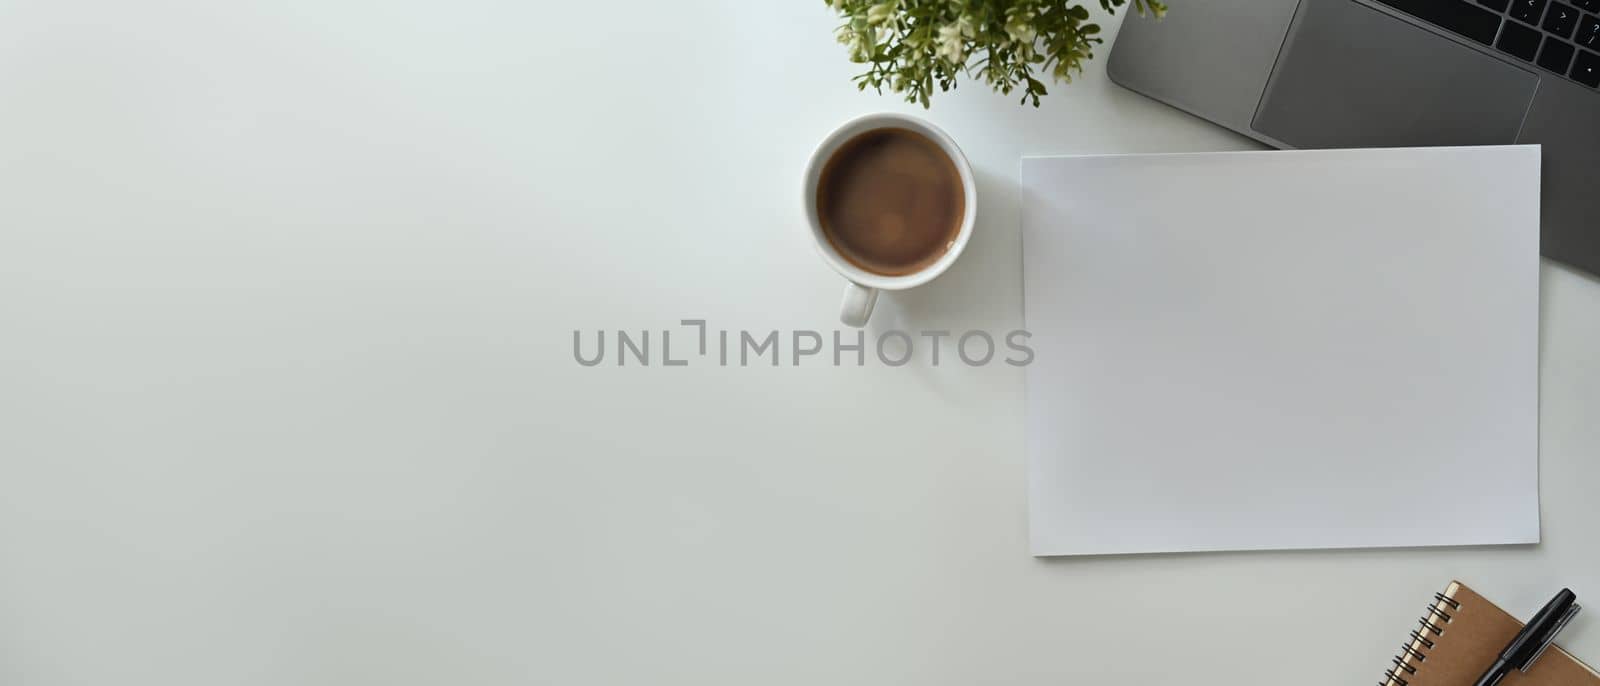 Flat lay, Top view of blank paper, cup of coffee, laptop and notebook on office desk. Copy space for advertise text.